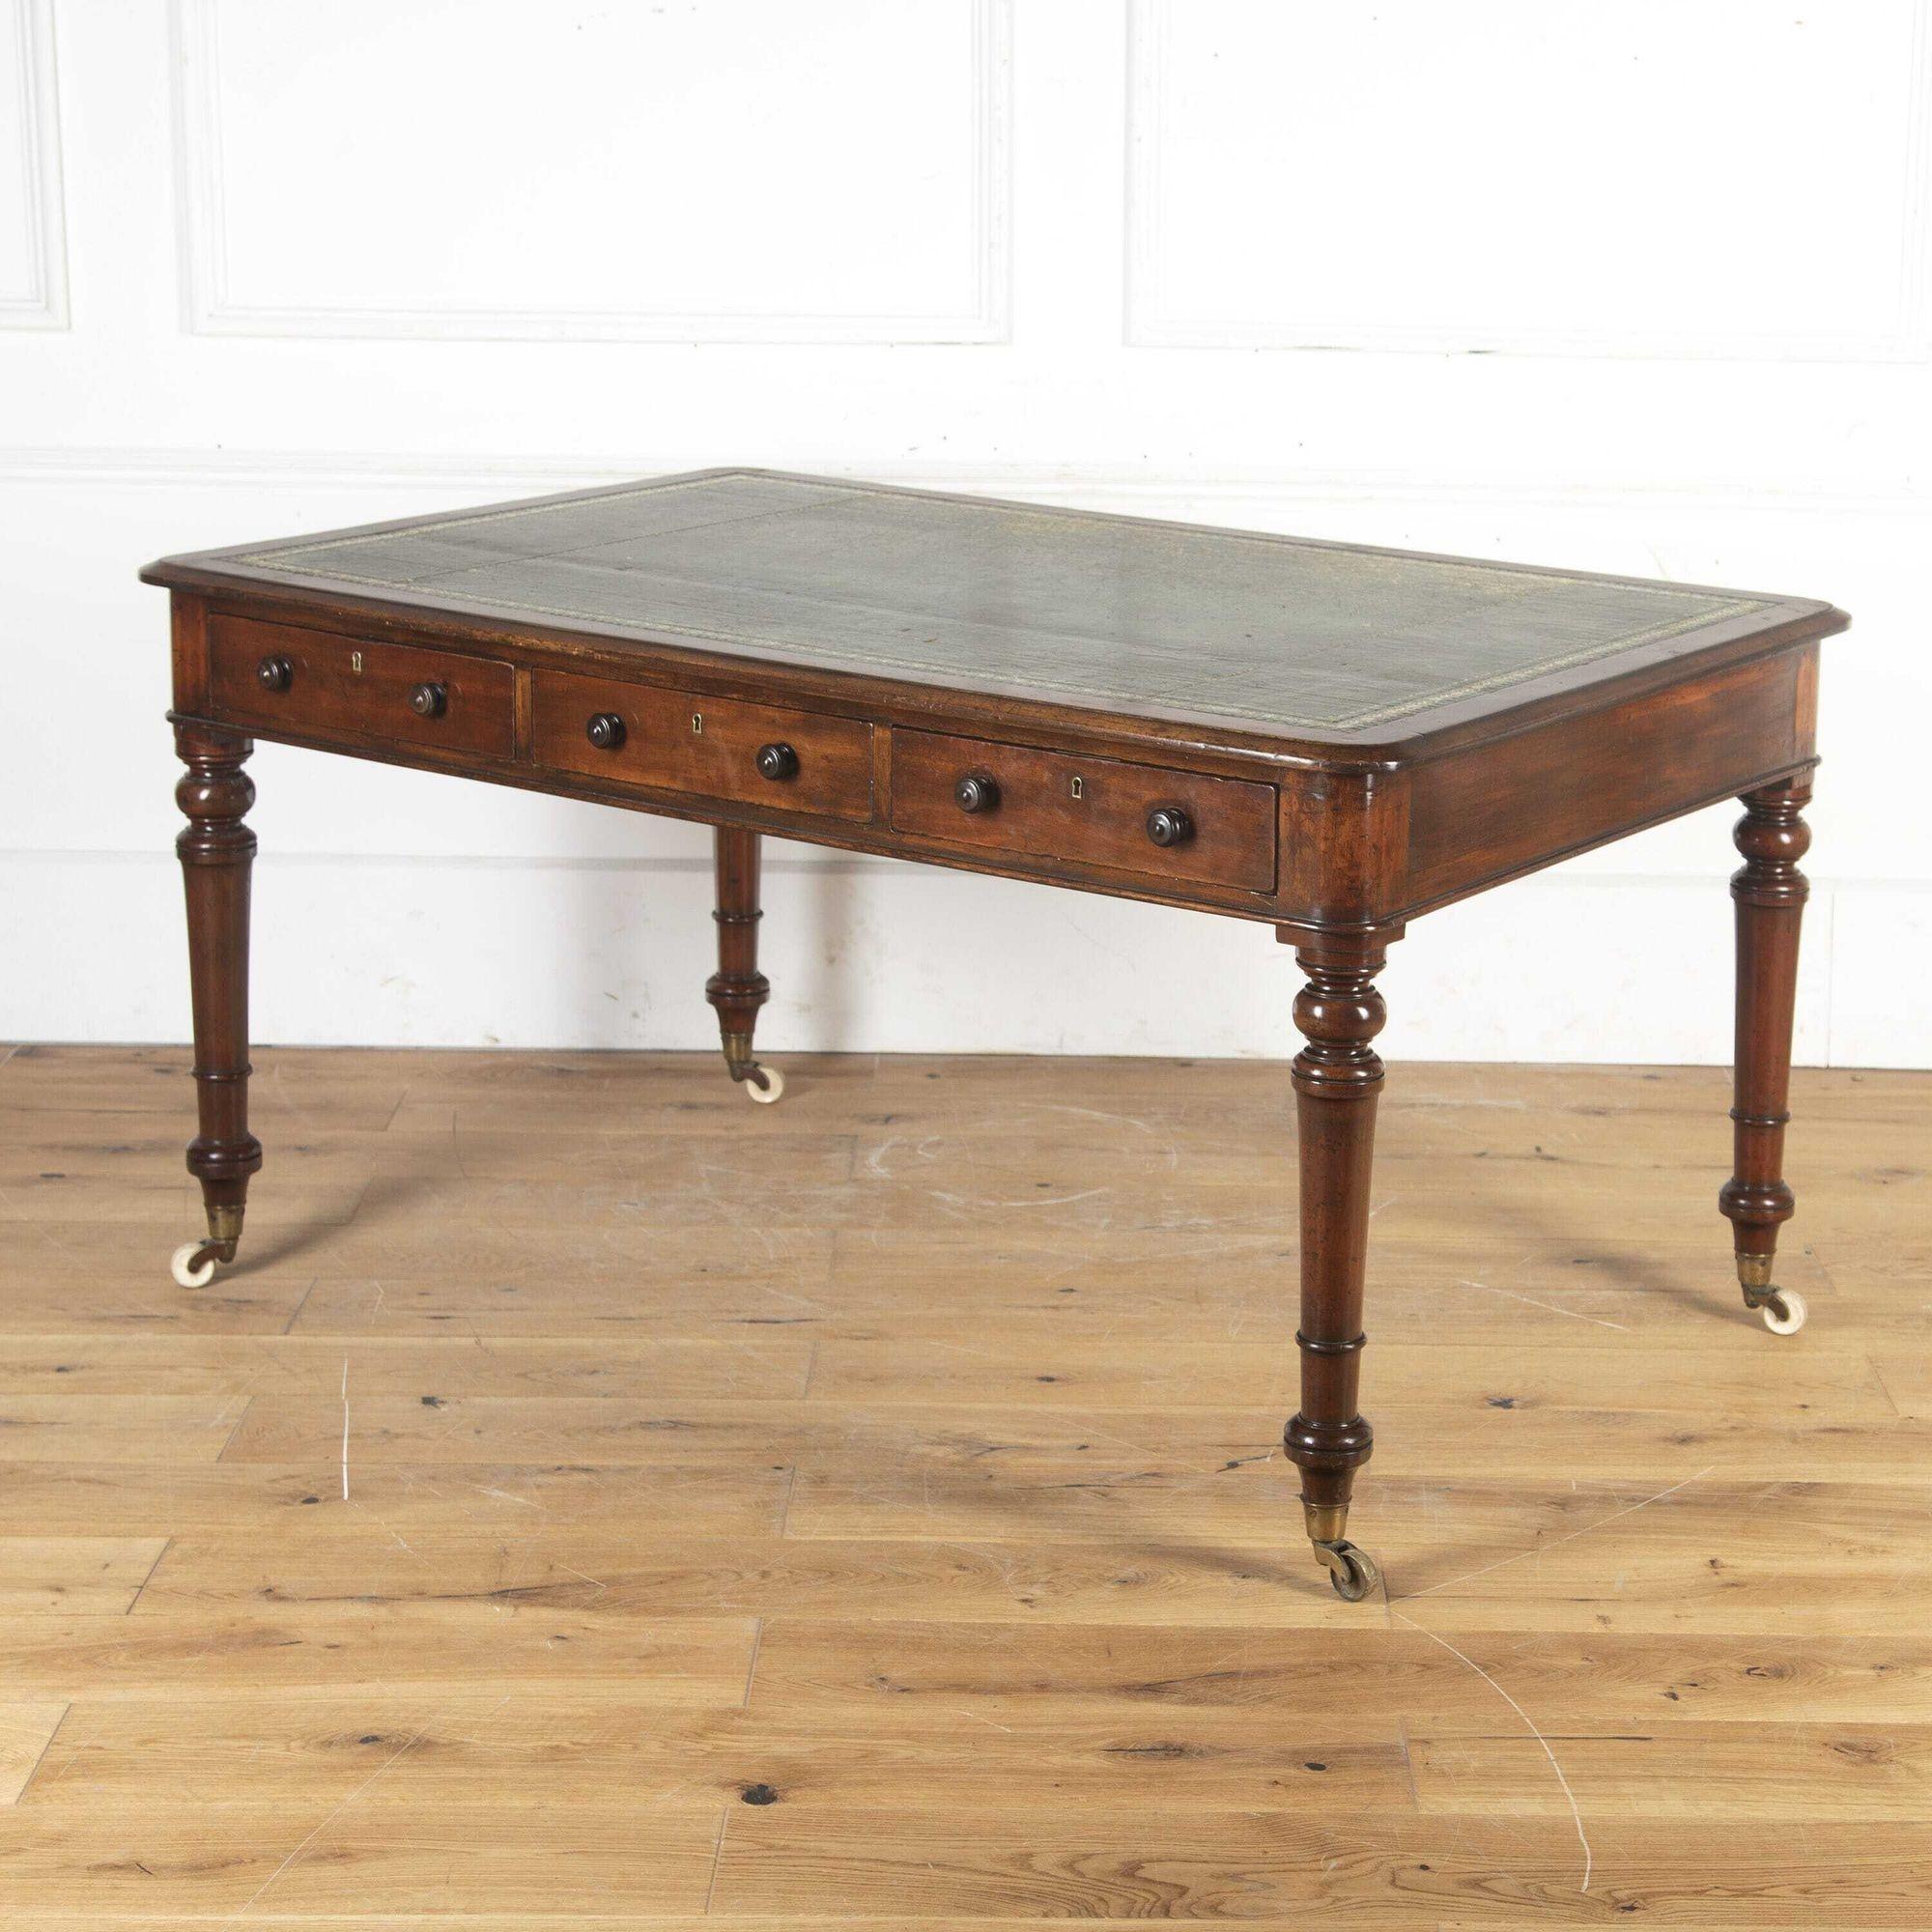 Fine quality 19th Century mahogany library table or partners' desk.
This beautiful table is designed to free-stand in a room, with six drawers - three to each side of the frieze. It retains its old worn gilt-tooled green leather inset to the top.